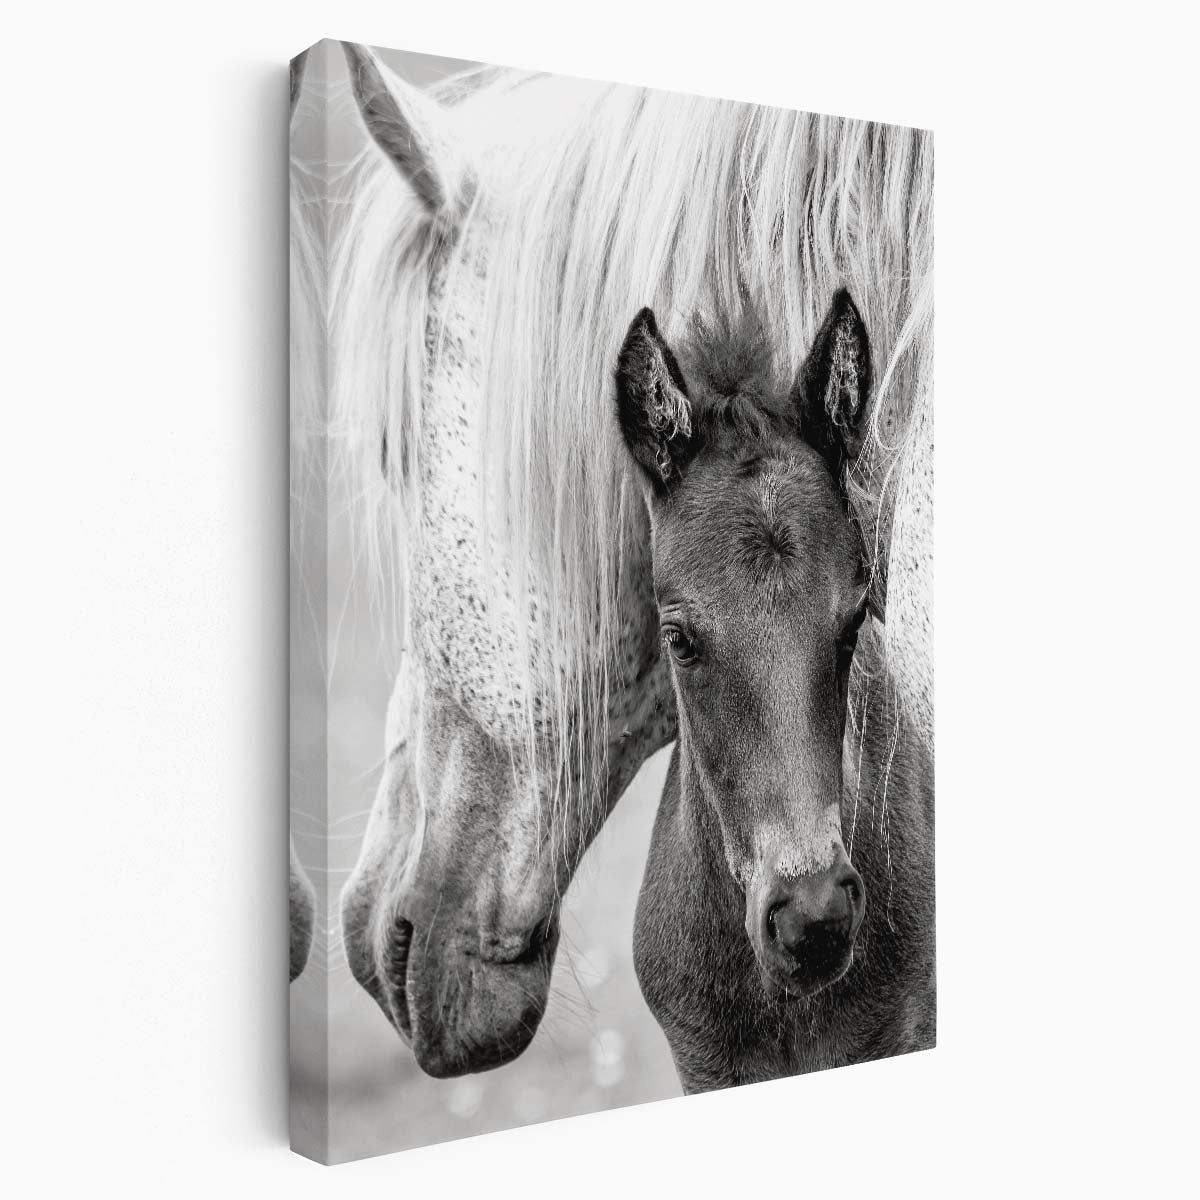 Monochrome Equestrian Love Mother Horse and Foal Photography Art by Luxuriance Designs, made in USA